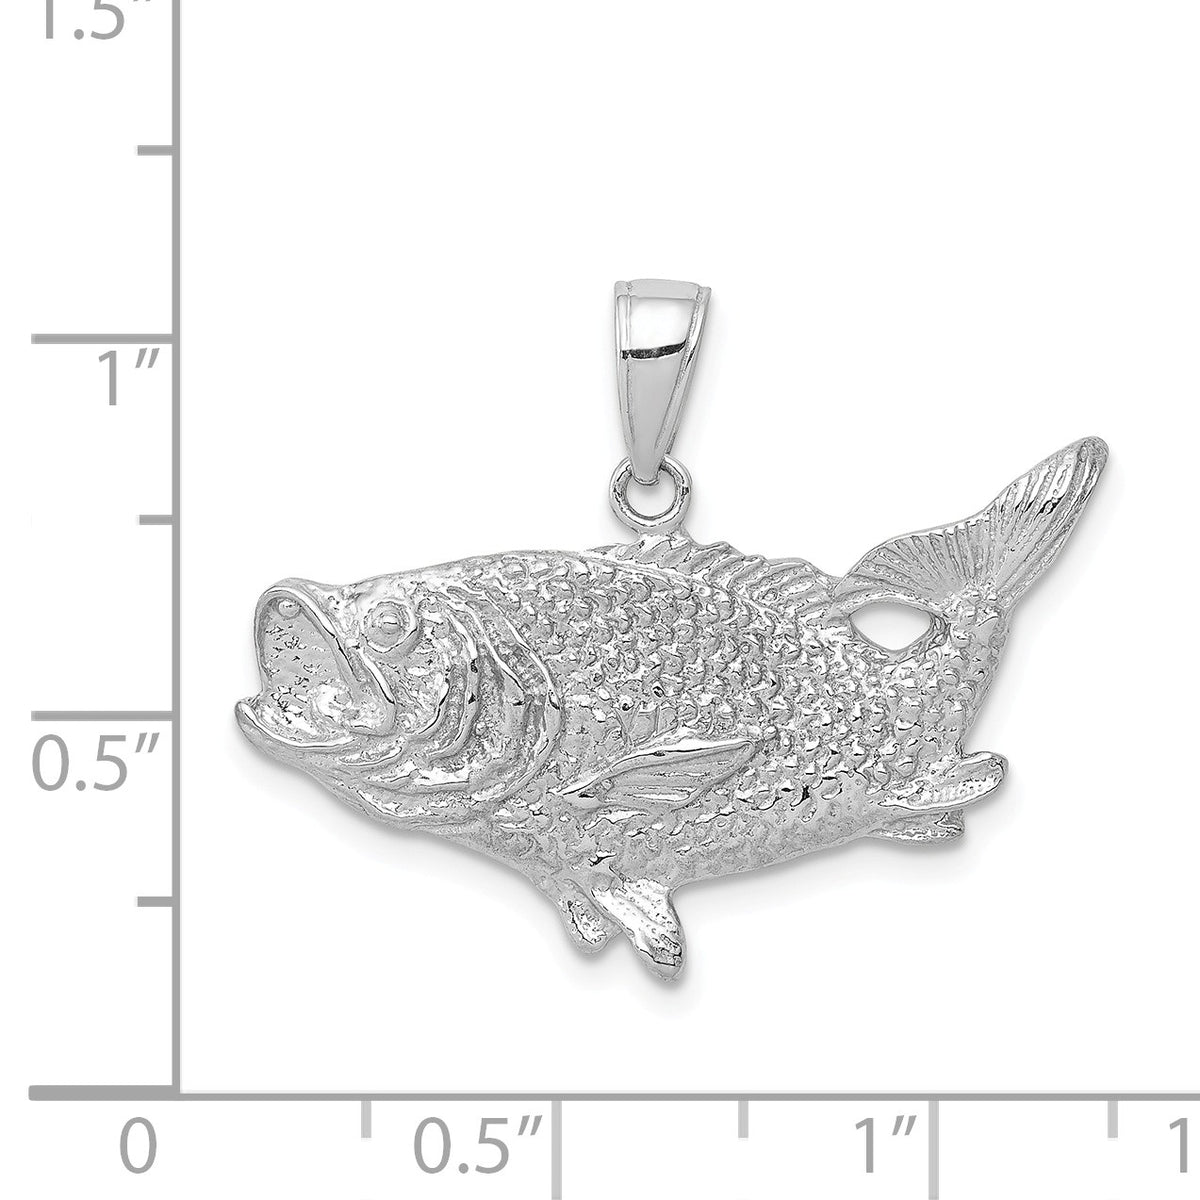 Alternate view of the 14k White Gold Largemouth Bass Pendant by The Black Bow Jewelry Co.